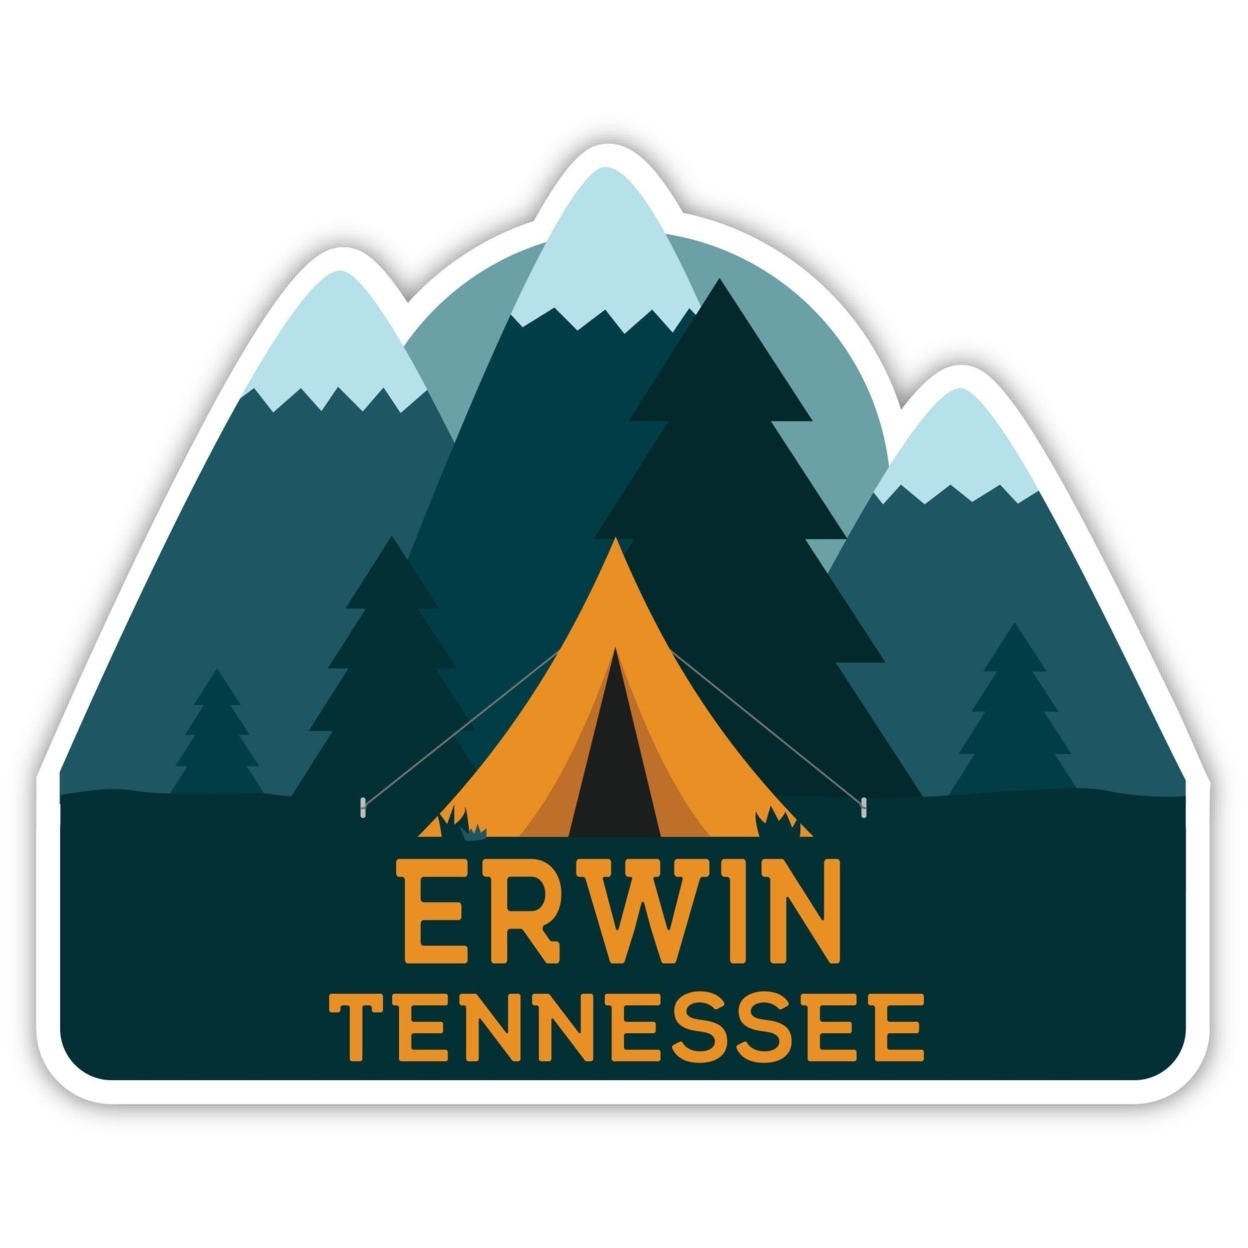 Erwin Tennessee Souvenir Decorative Stickers (Choose Theme And Size) - 4-Pack, 4-Inch, Tent